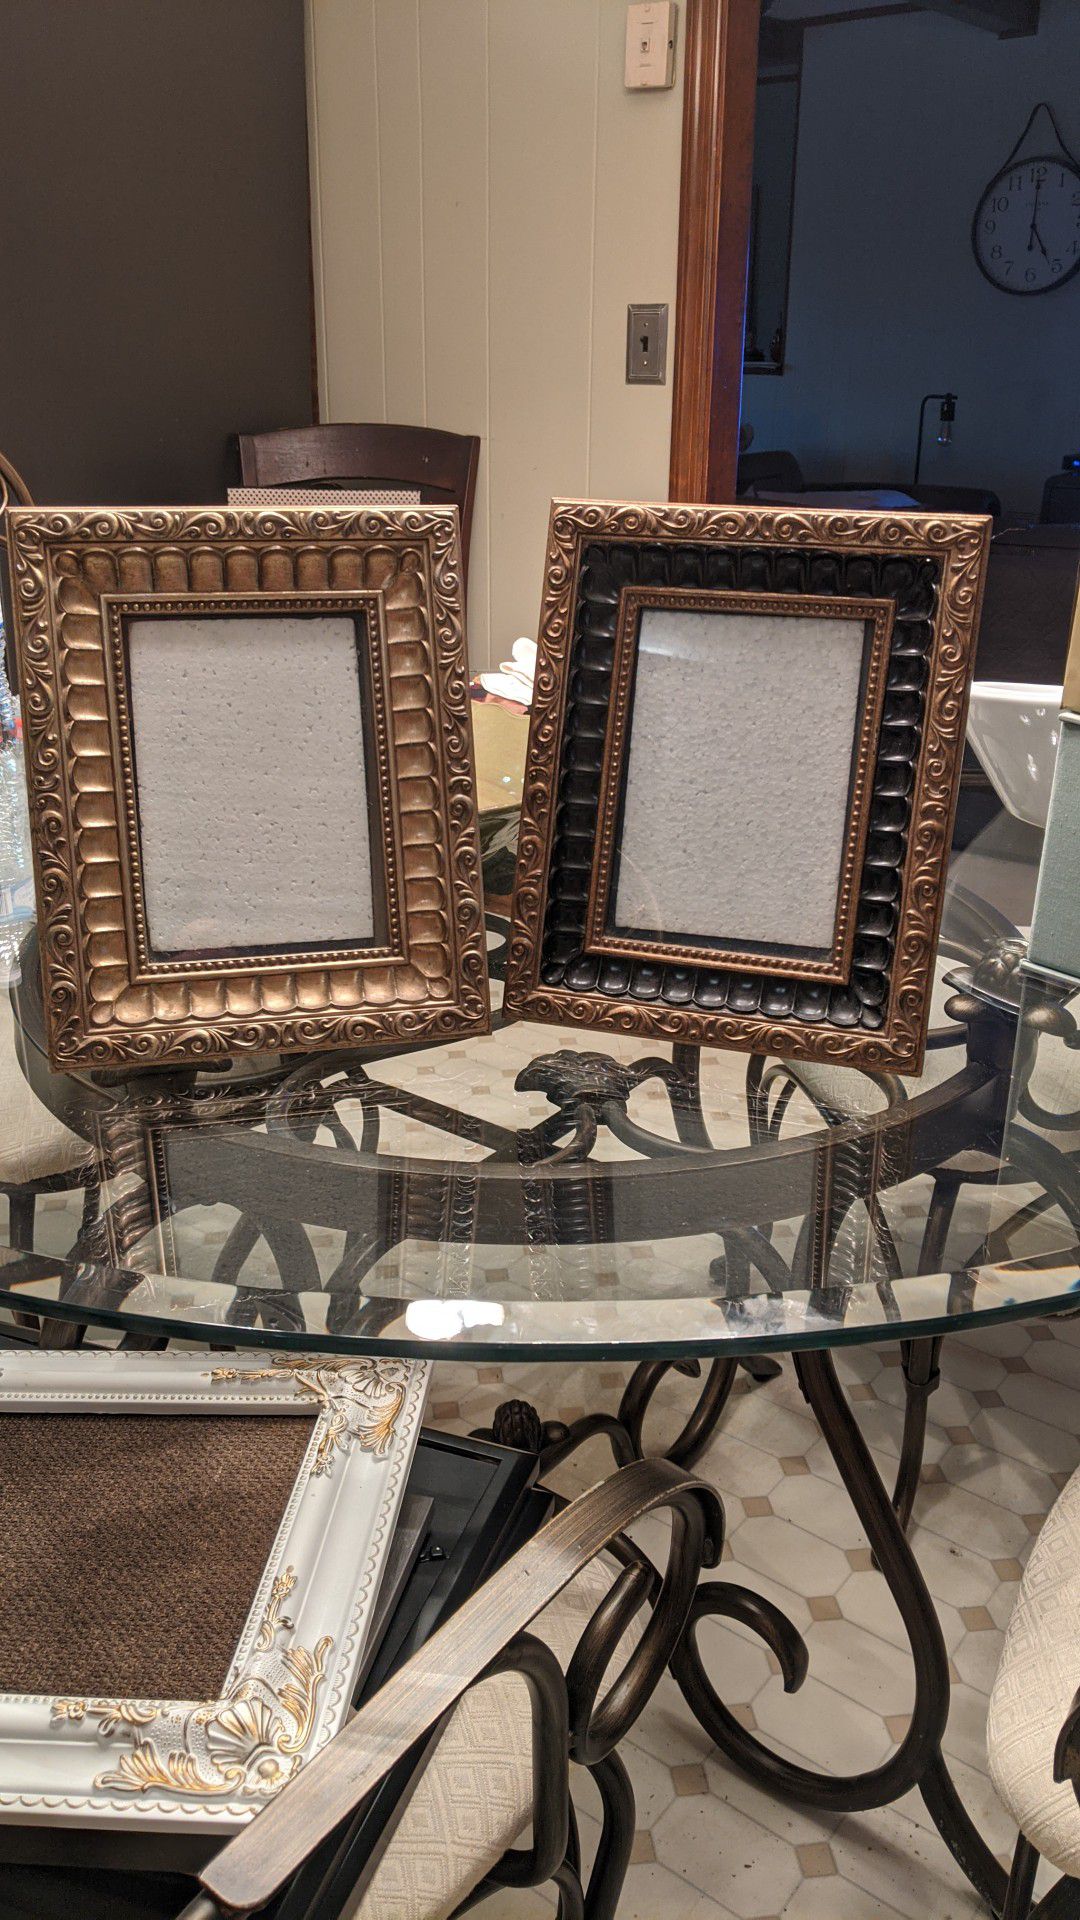 Beautiful Set of 2 Frames - one gold accents and one black & Gold - Awesome for photo gifts!